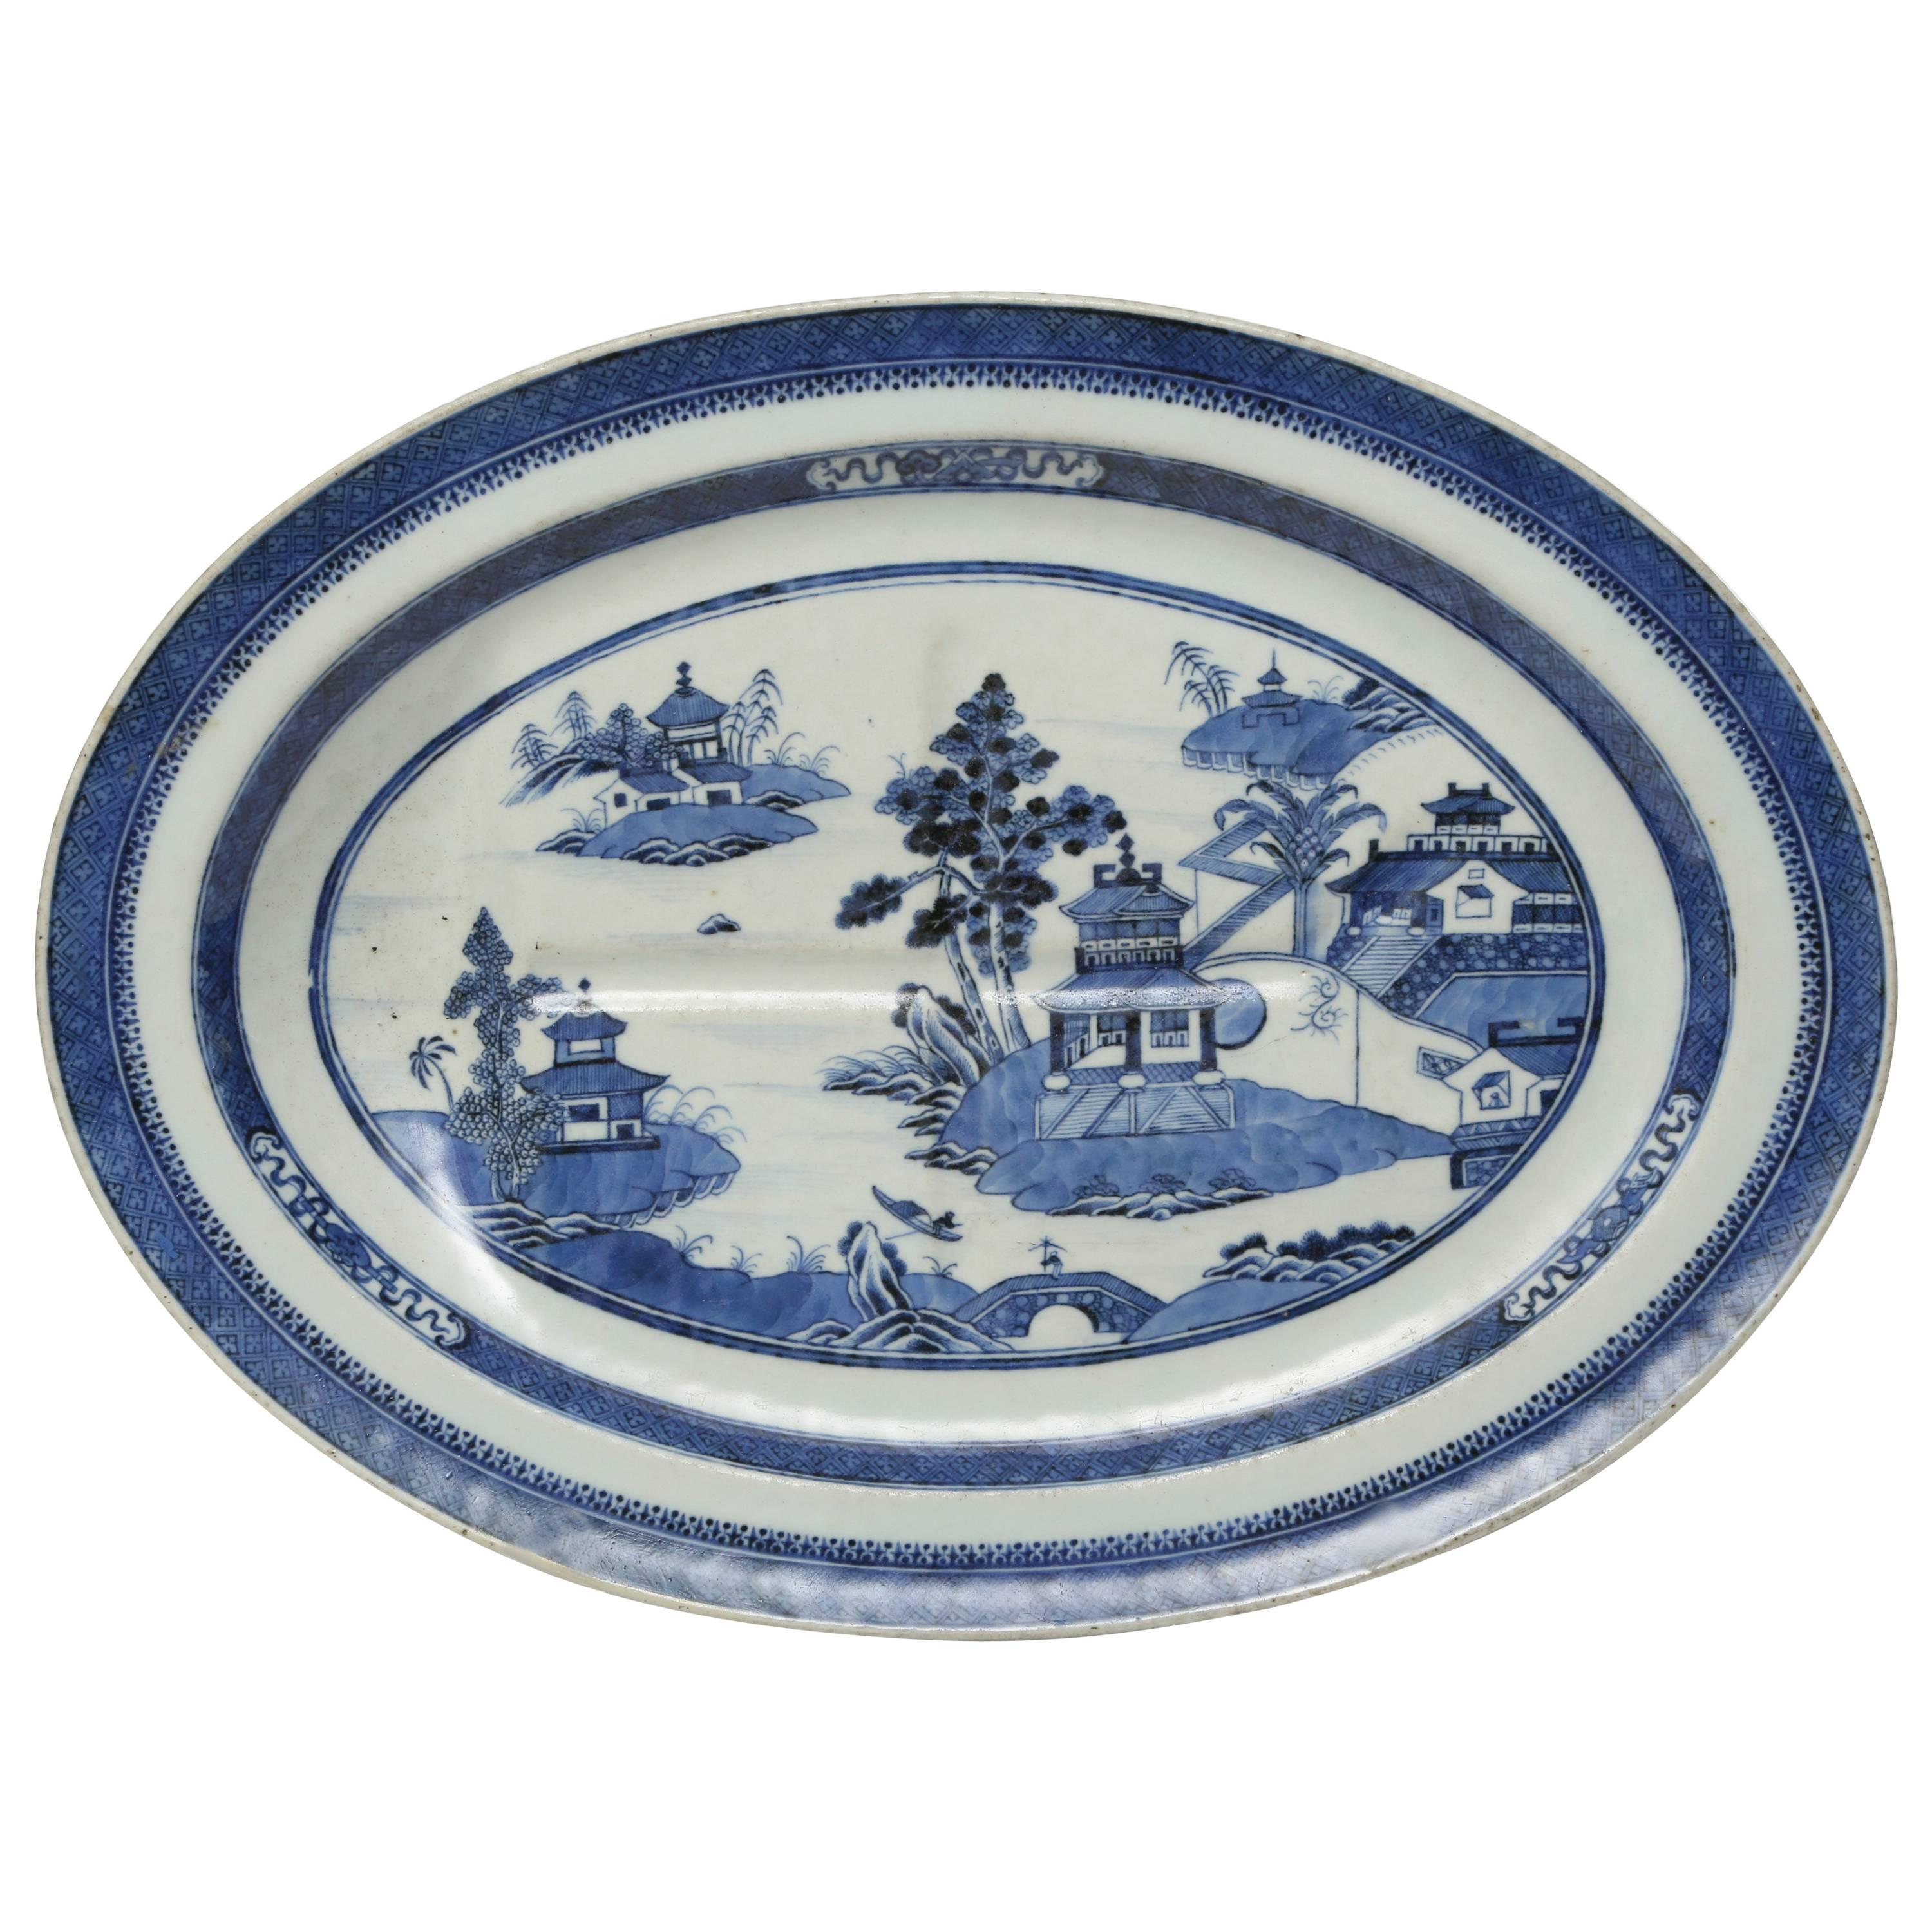 Oval Porcelain Well and Tree Platter, Chinese Export, Nanking Pattern, c. 1790